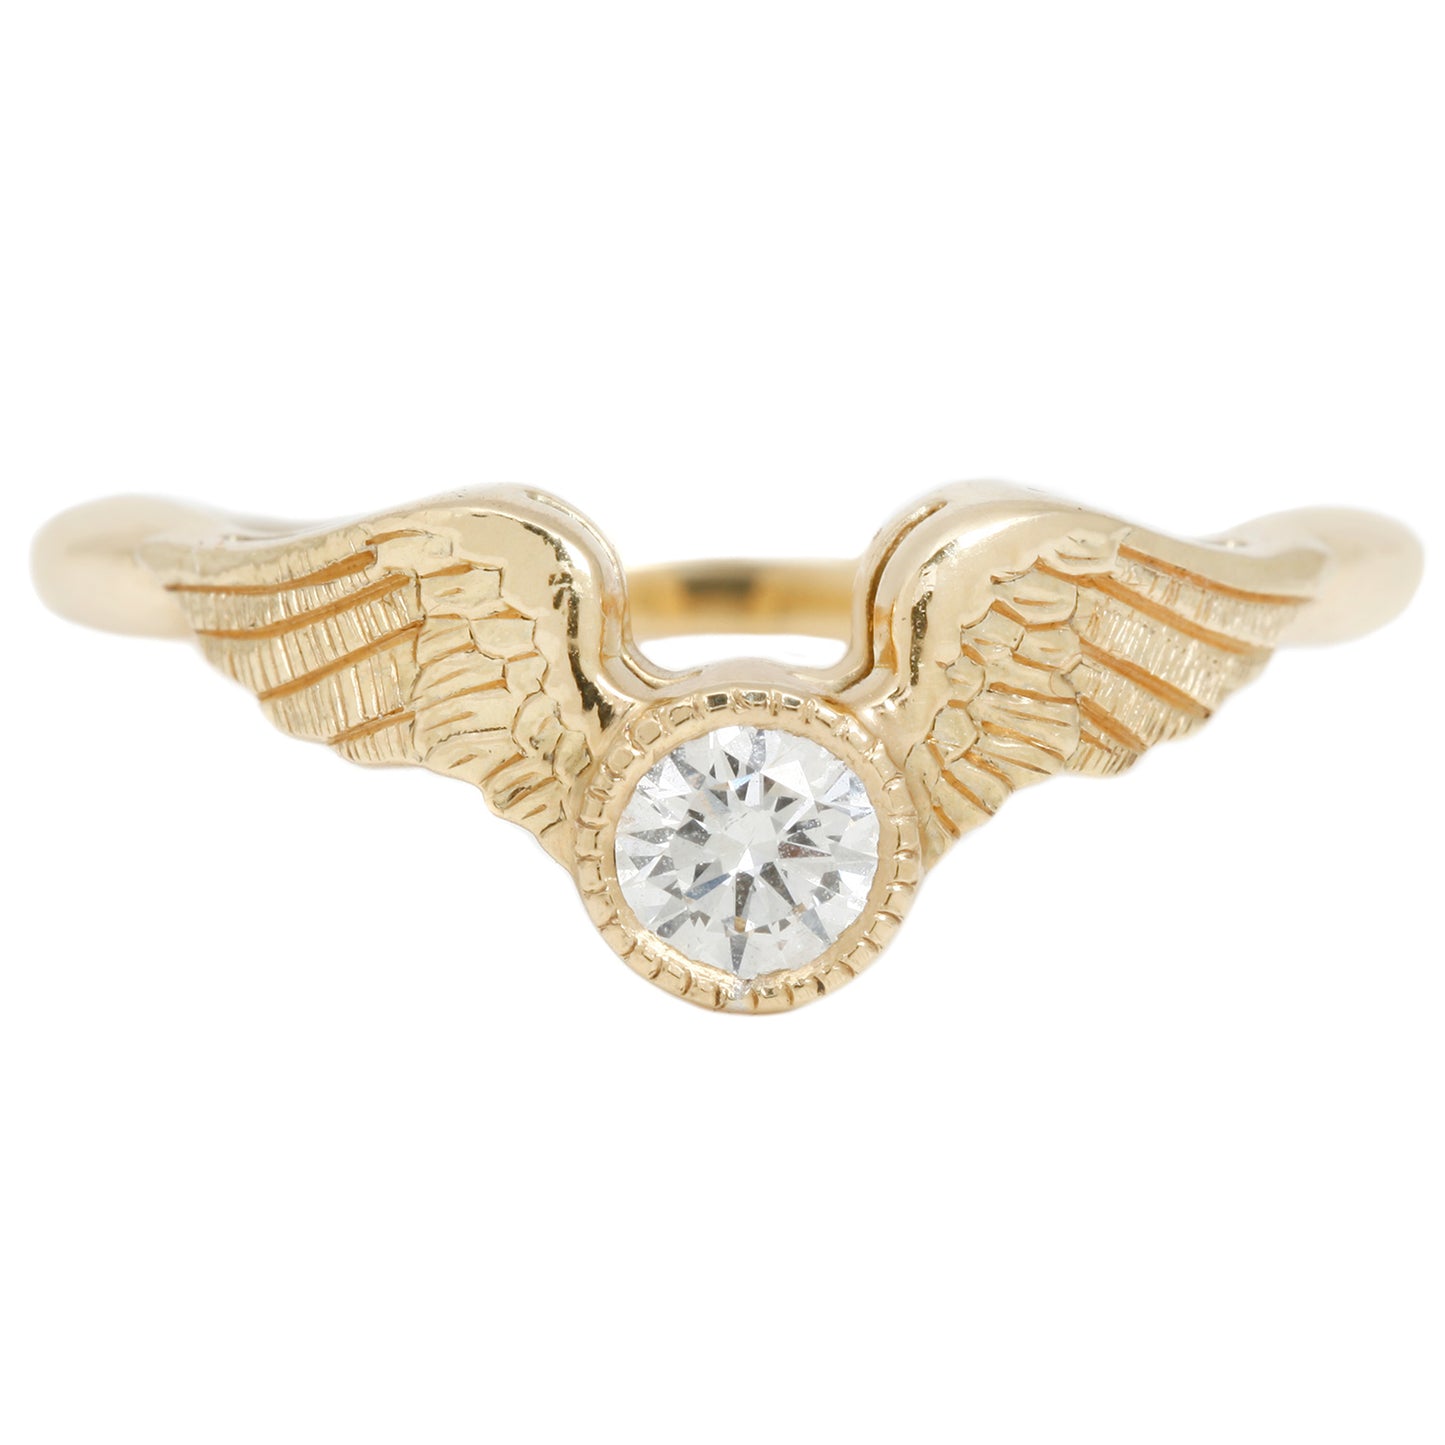 Anthony Lent Flying Diamond Ring set in yellow gold with a solitaire white diamond